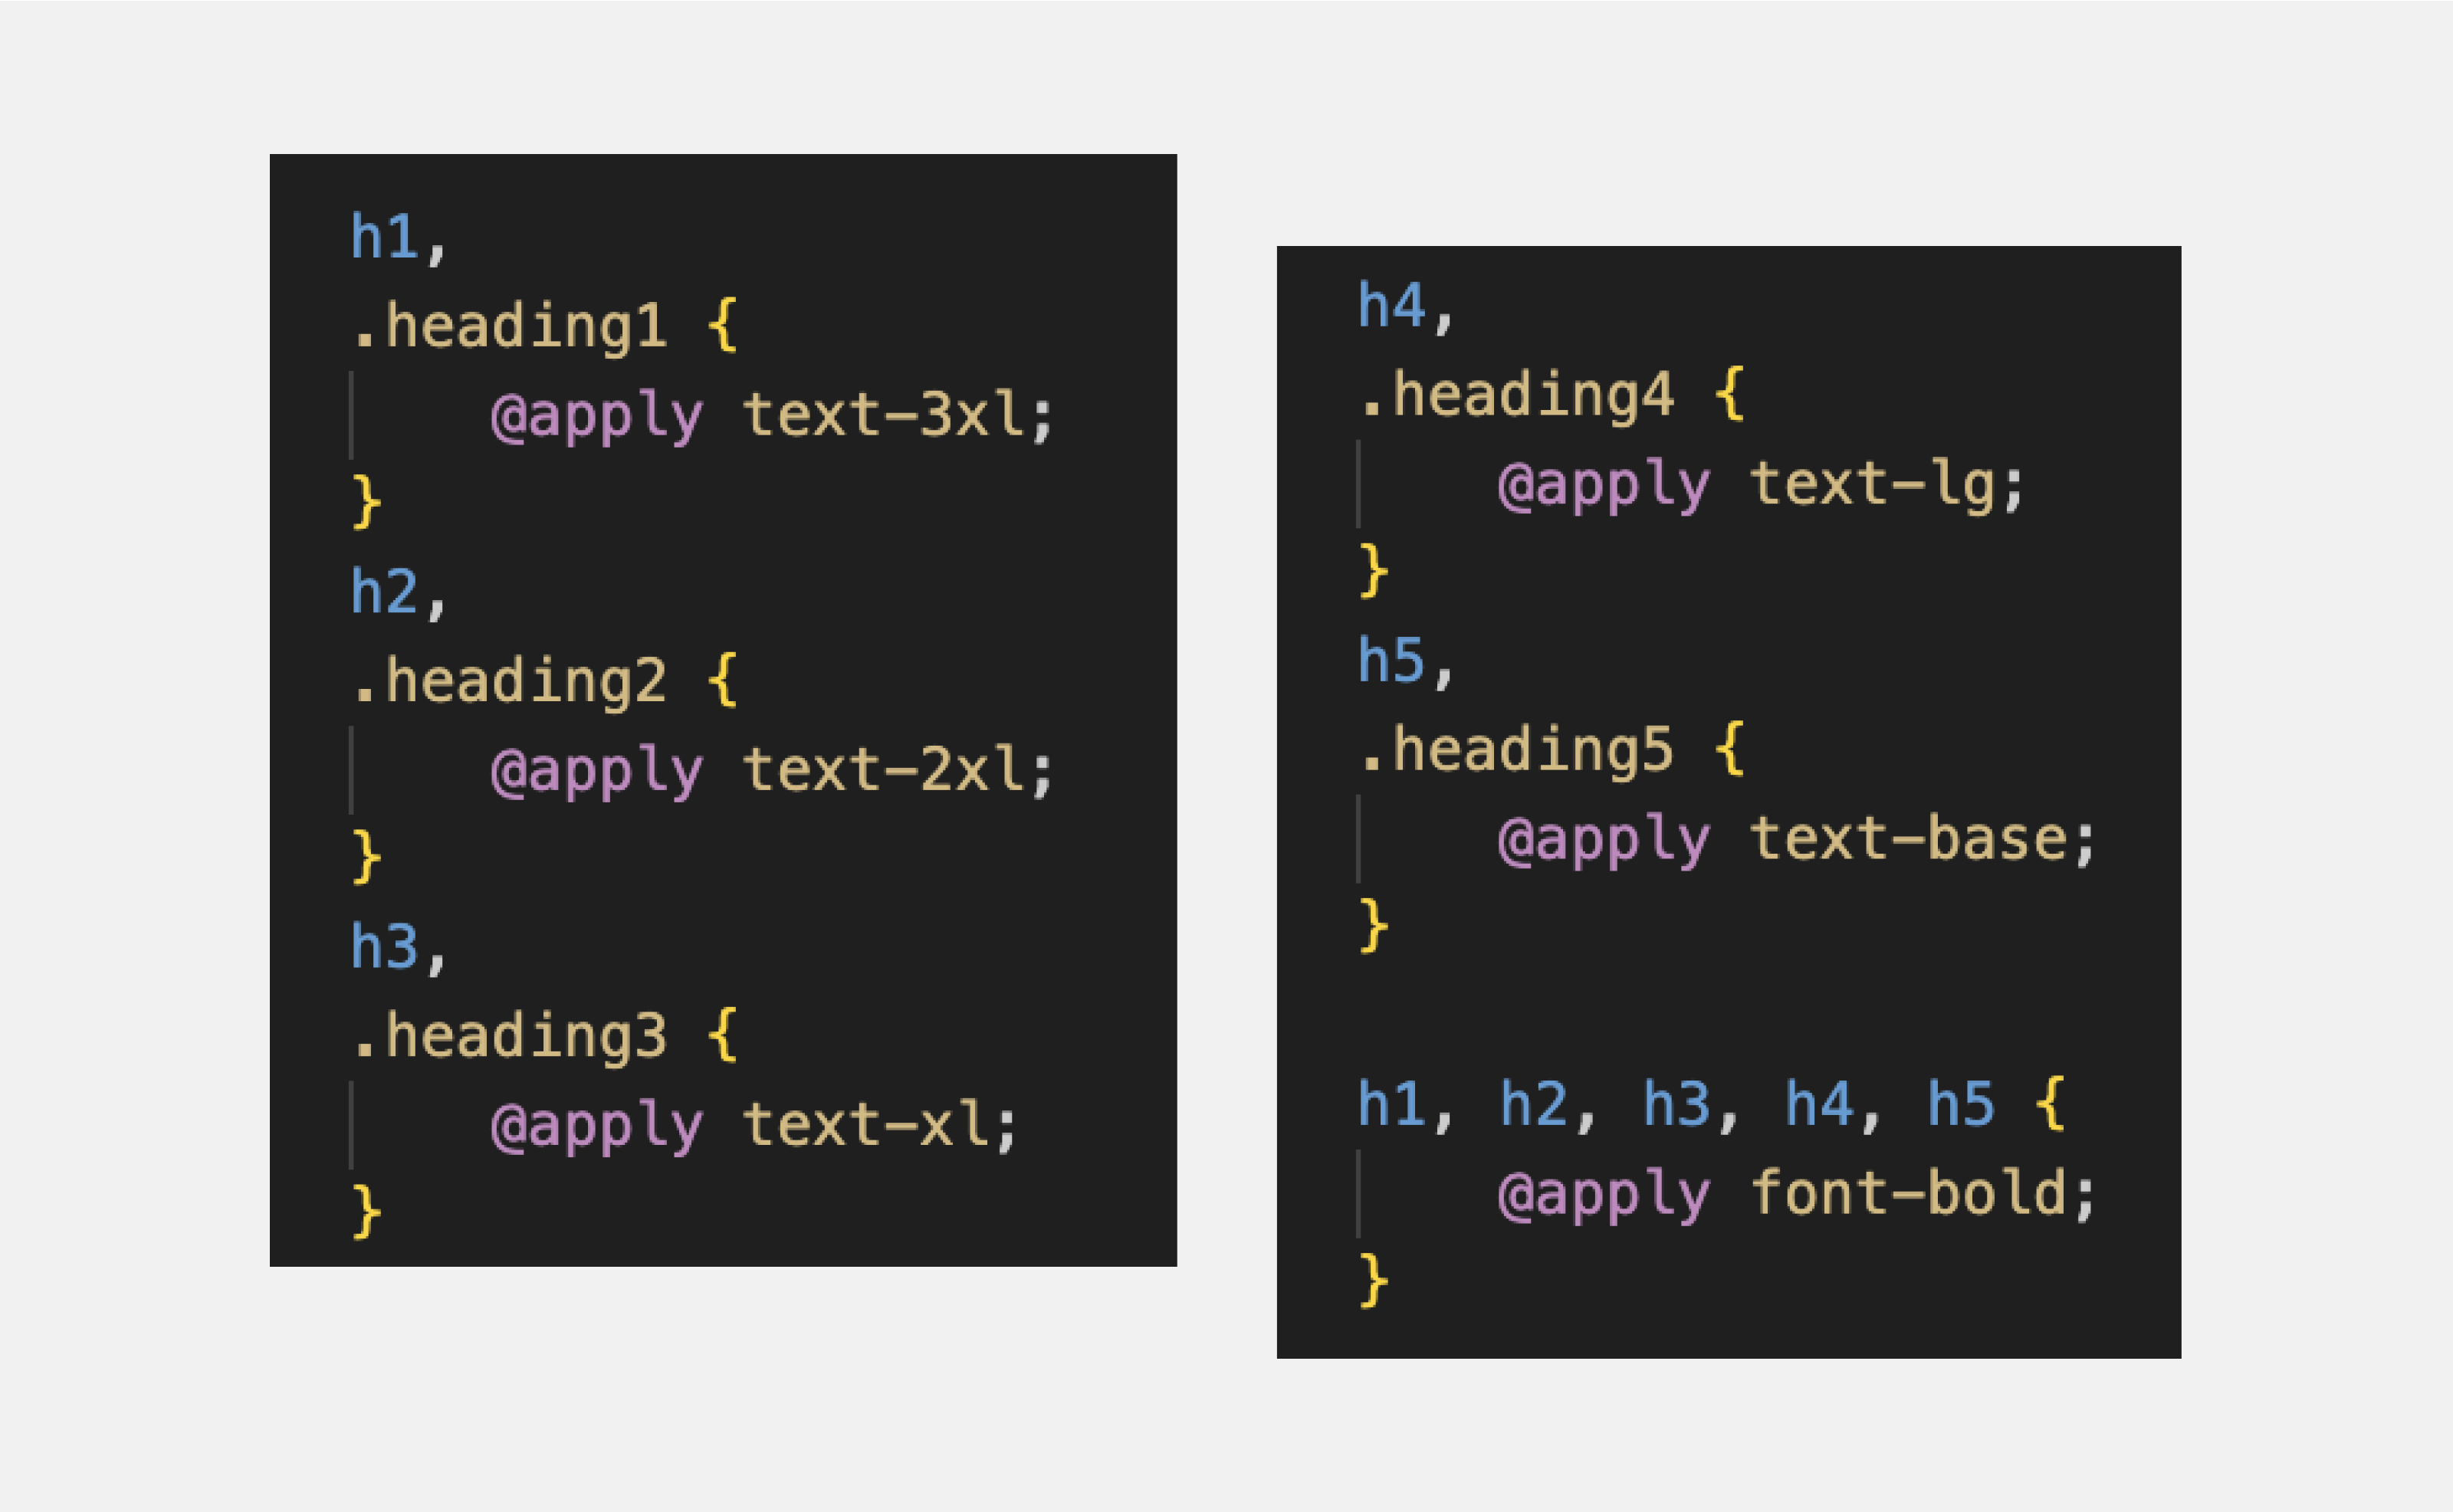 The image shows a snippet of CSS code that defines styles for headings h1 through h5. The code contains CSS selectors for each header, as well as style declarations for properties such as font size and bold.